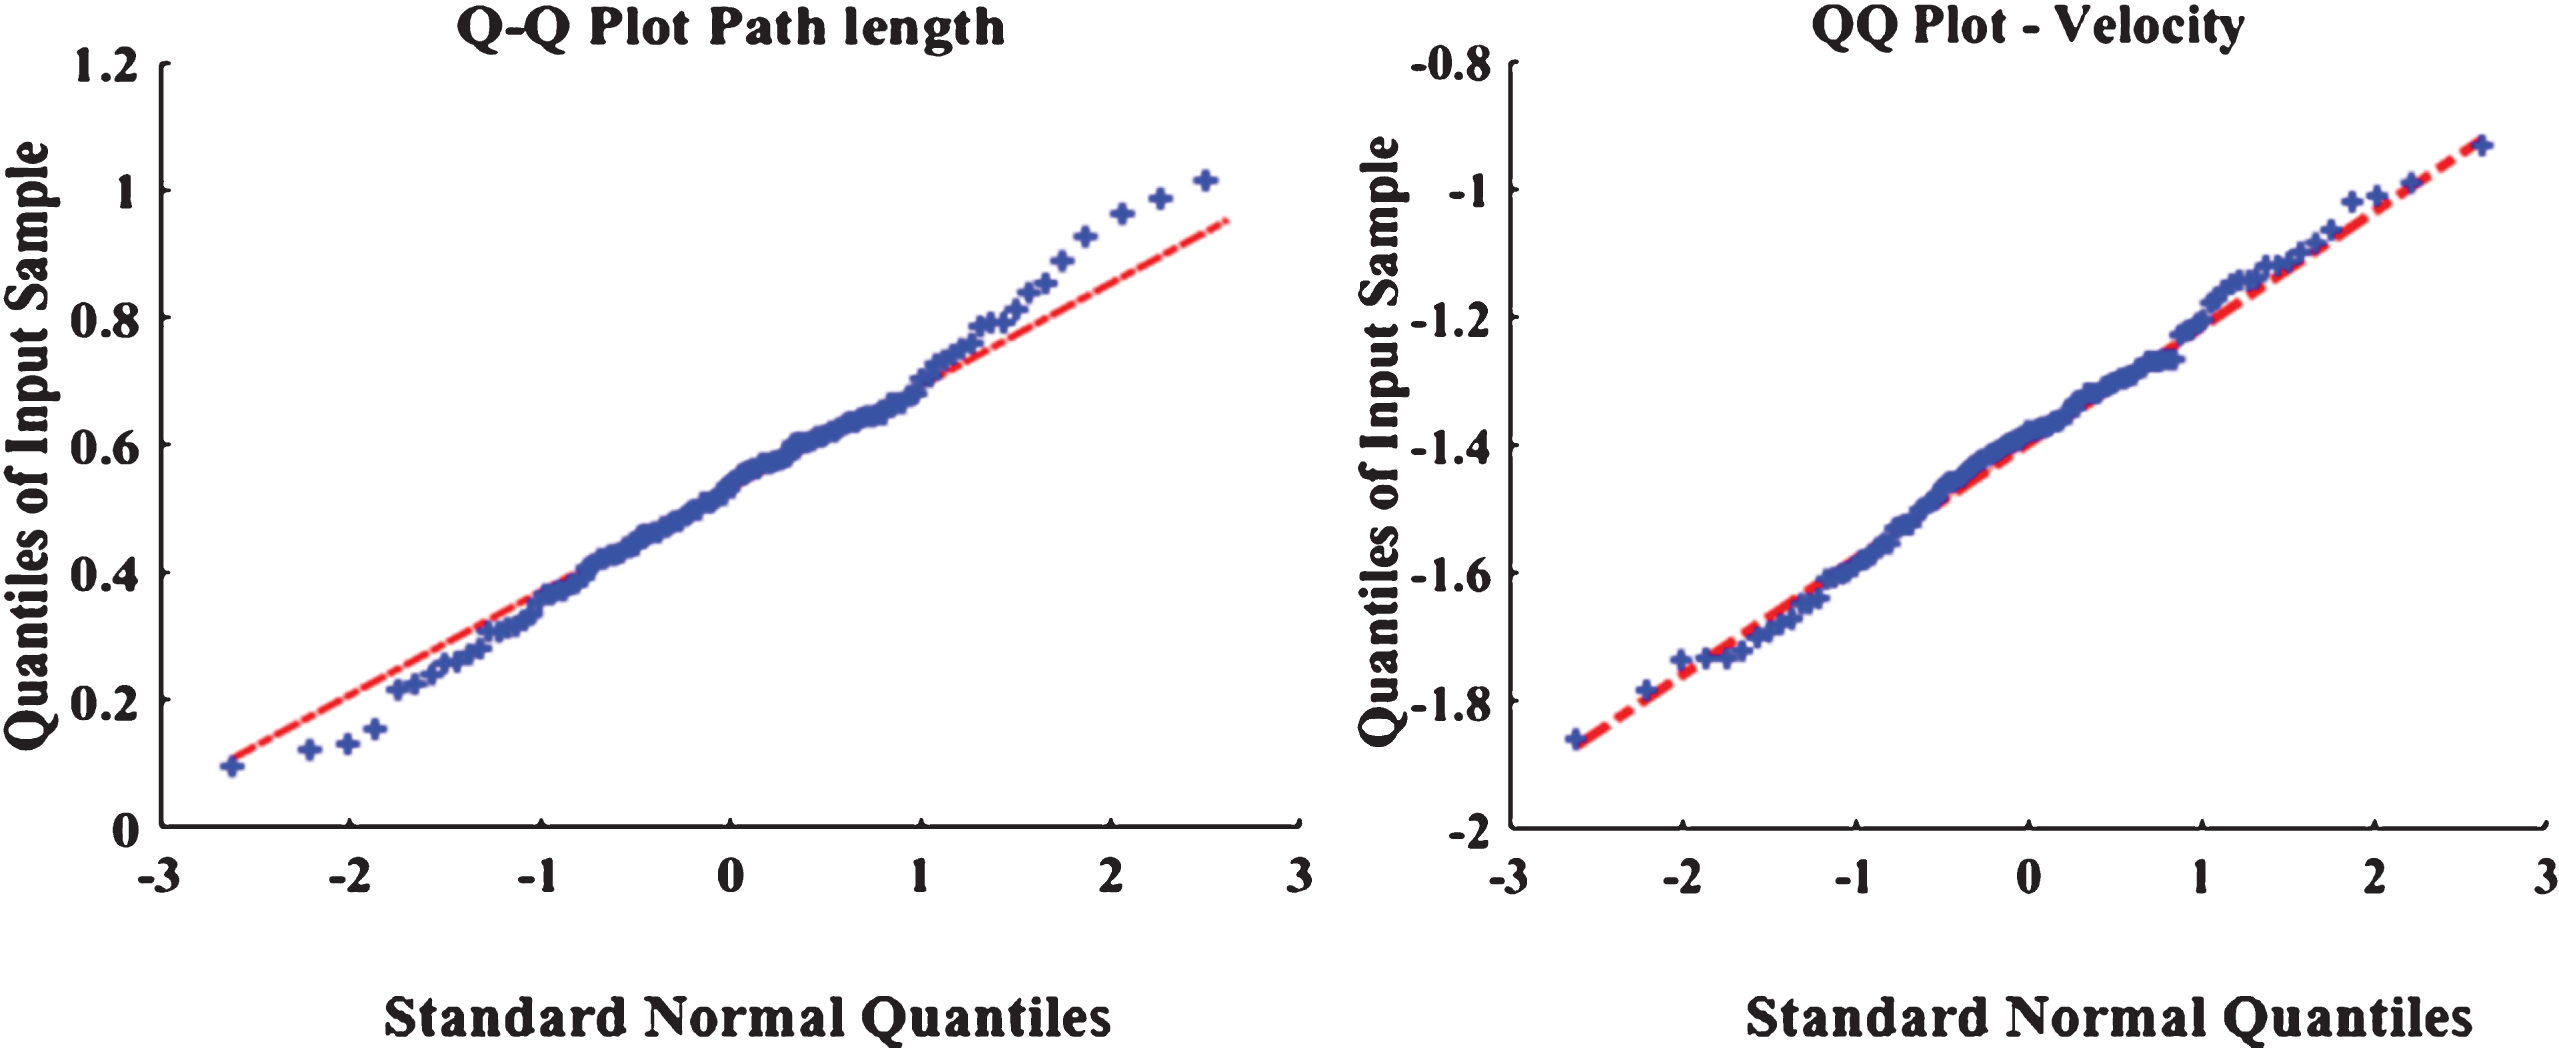 Normality testing. Shown here is a QQ-Plot for normality testing of the path length (left) and speed (right) metrics.